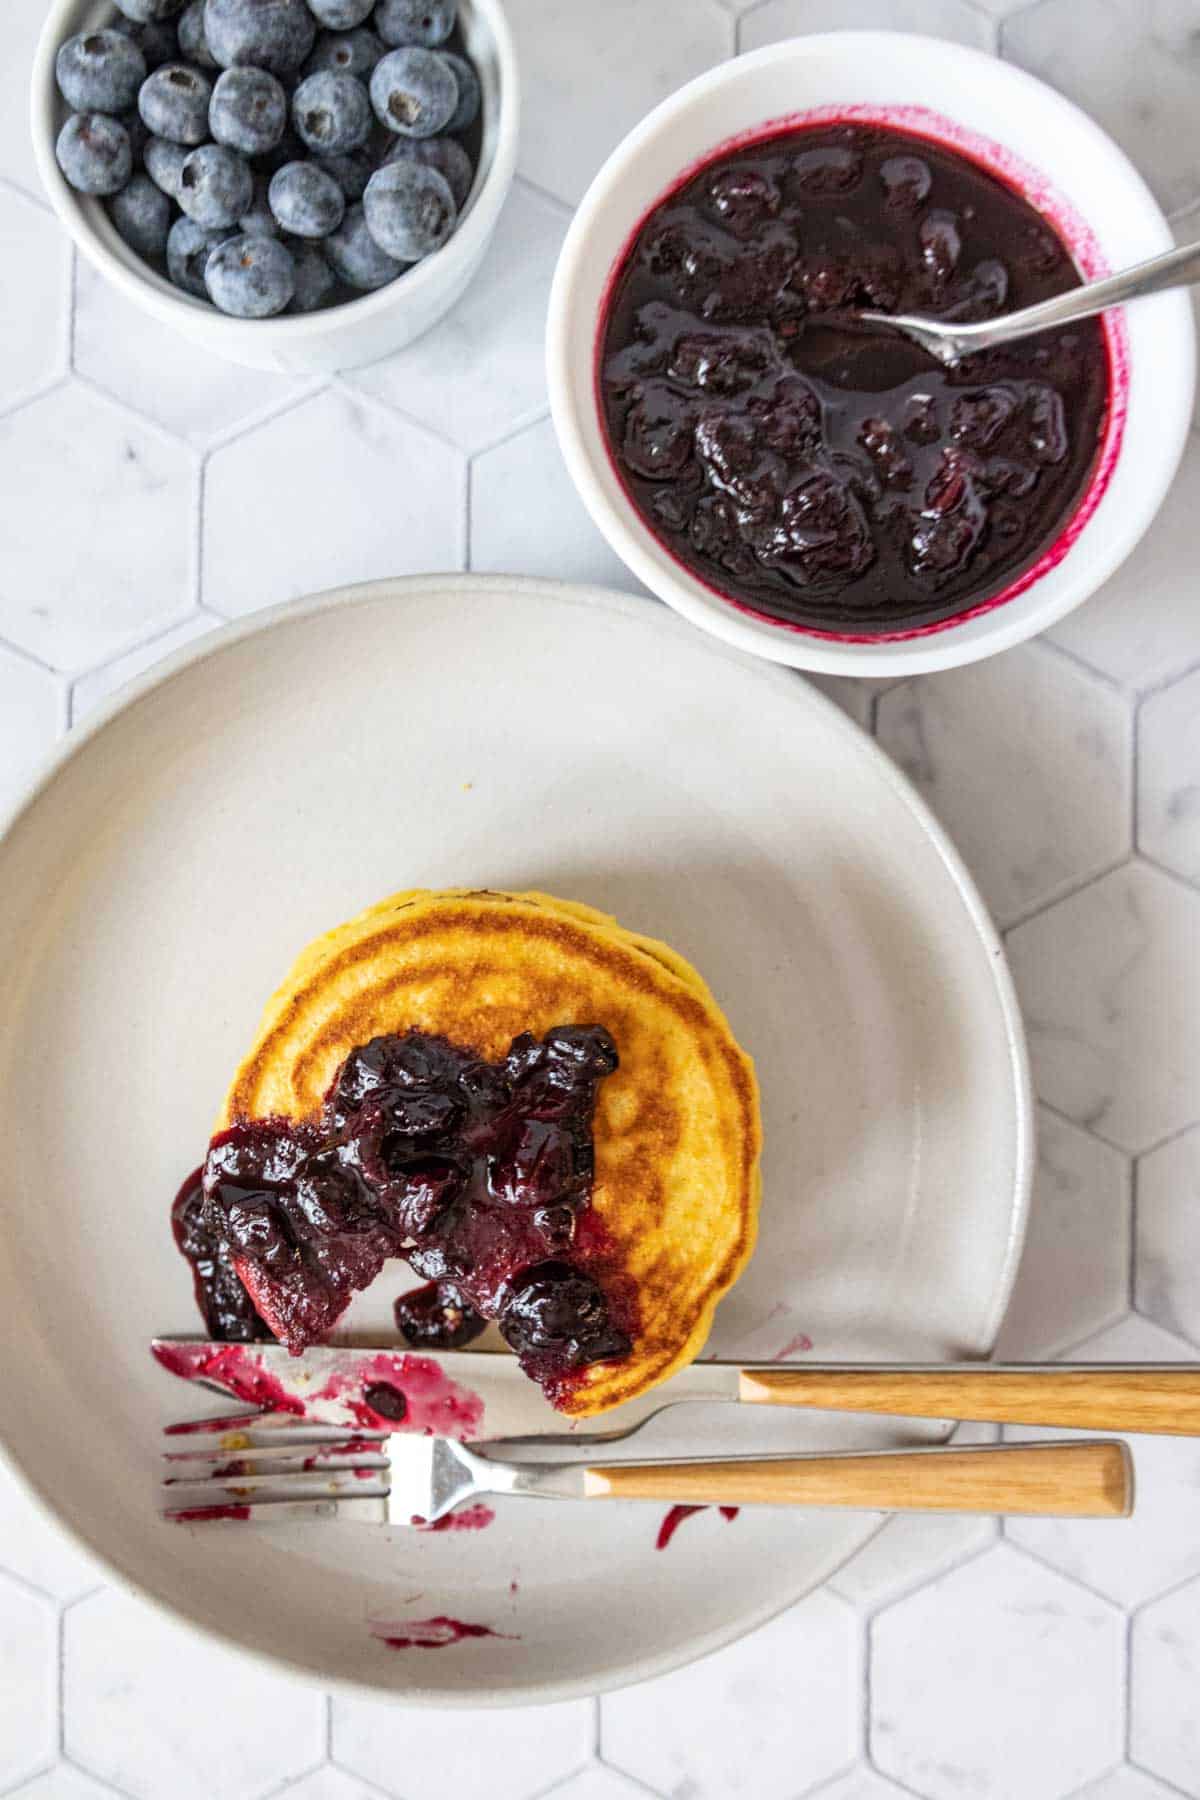 Overhead of cornmeal pancakes with blueberry sauce, partially eaten.